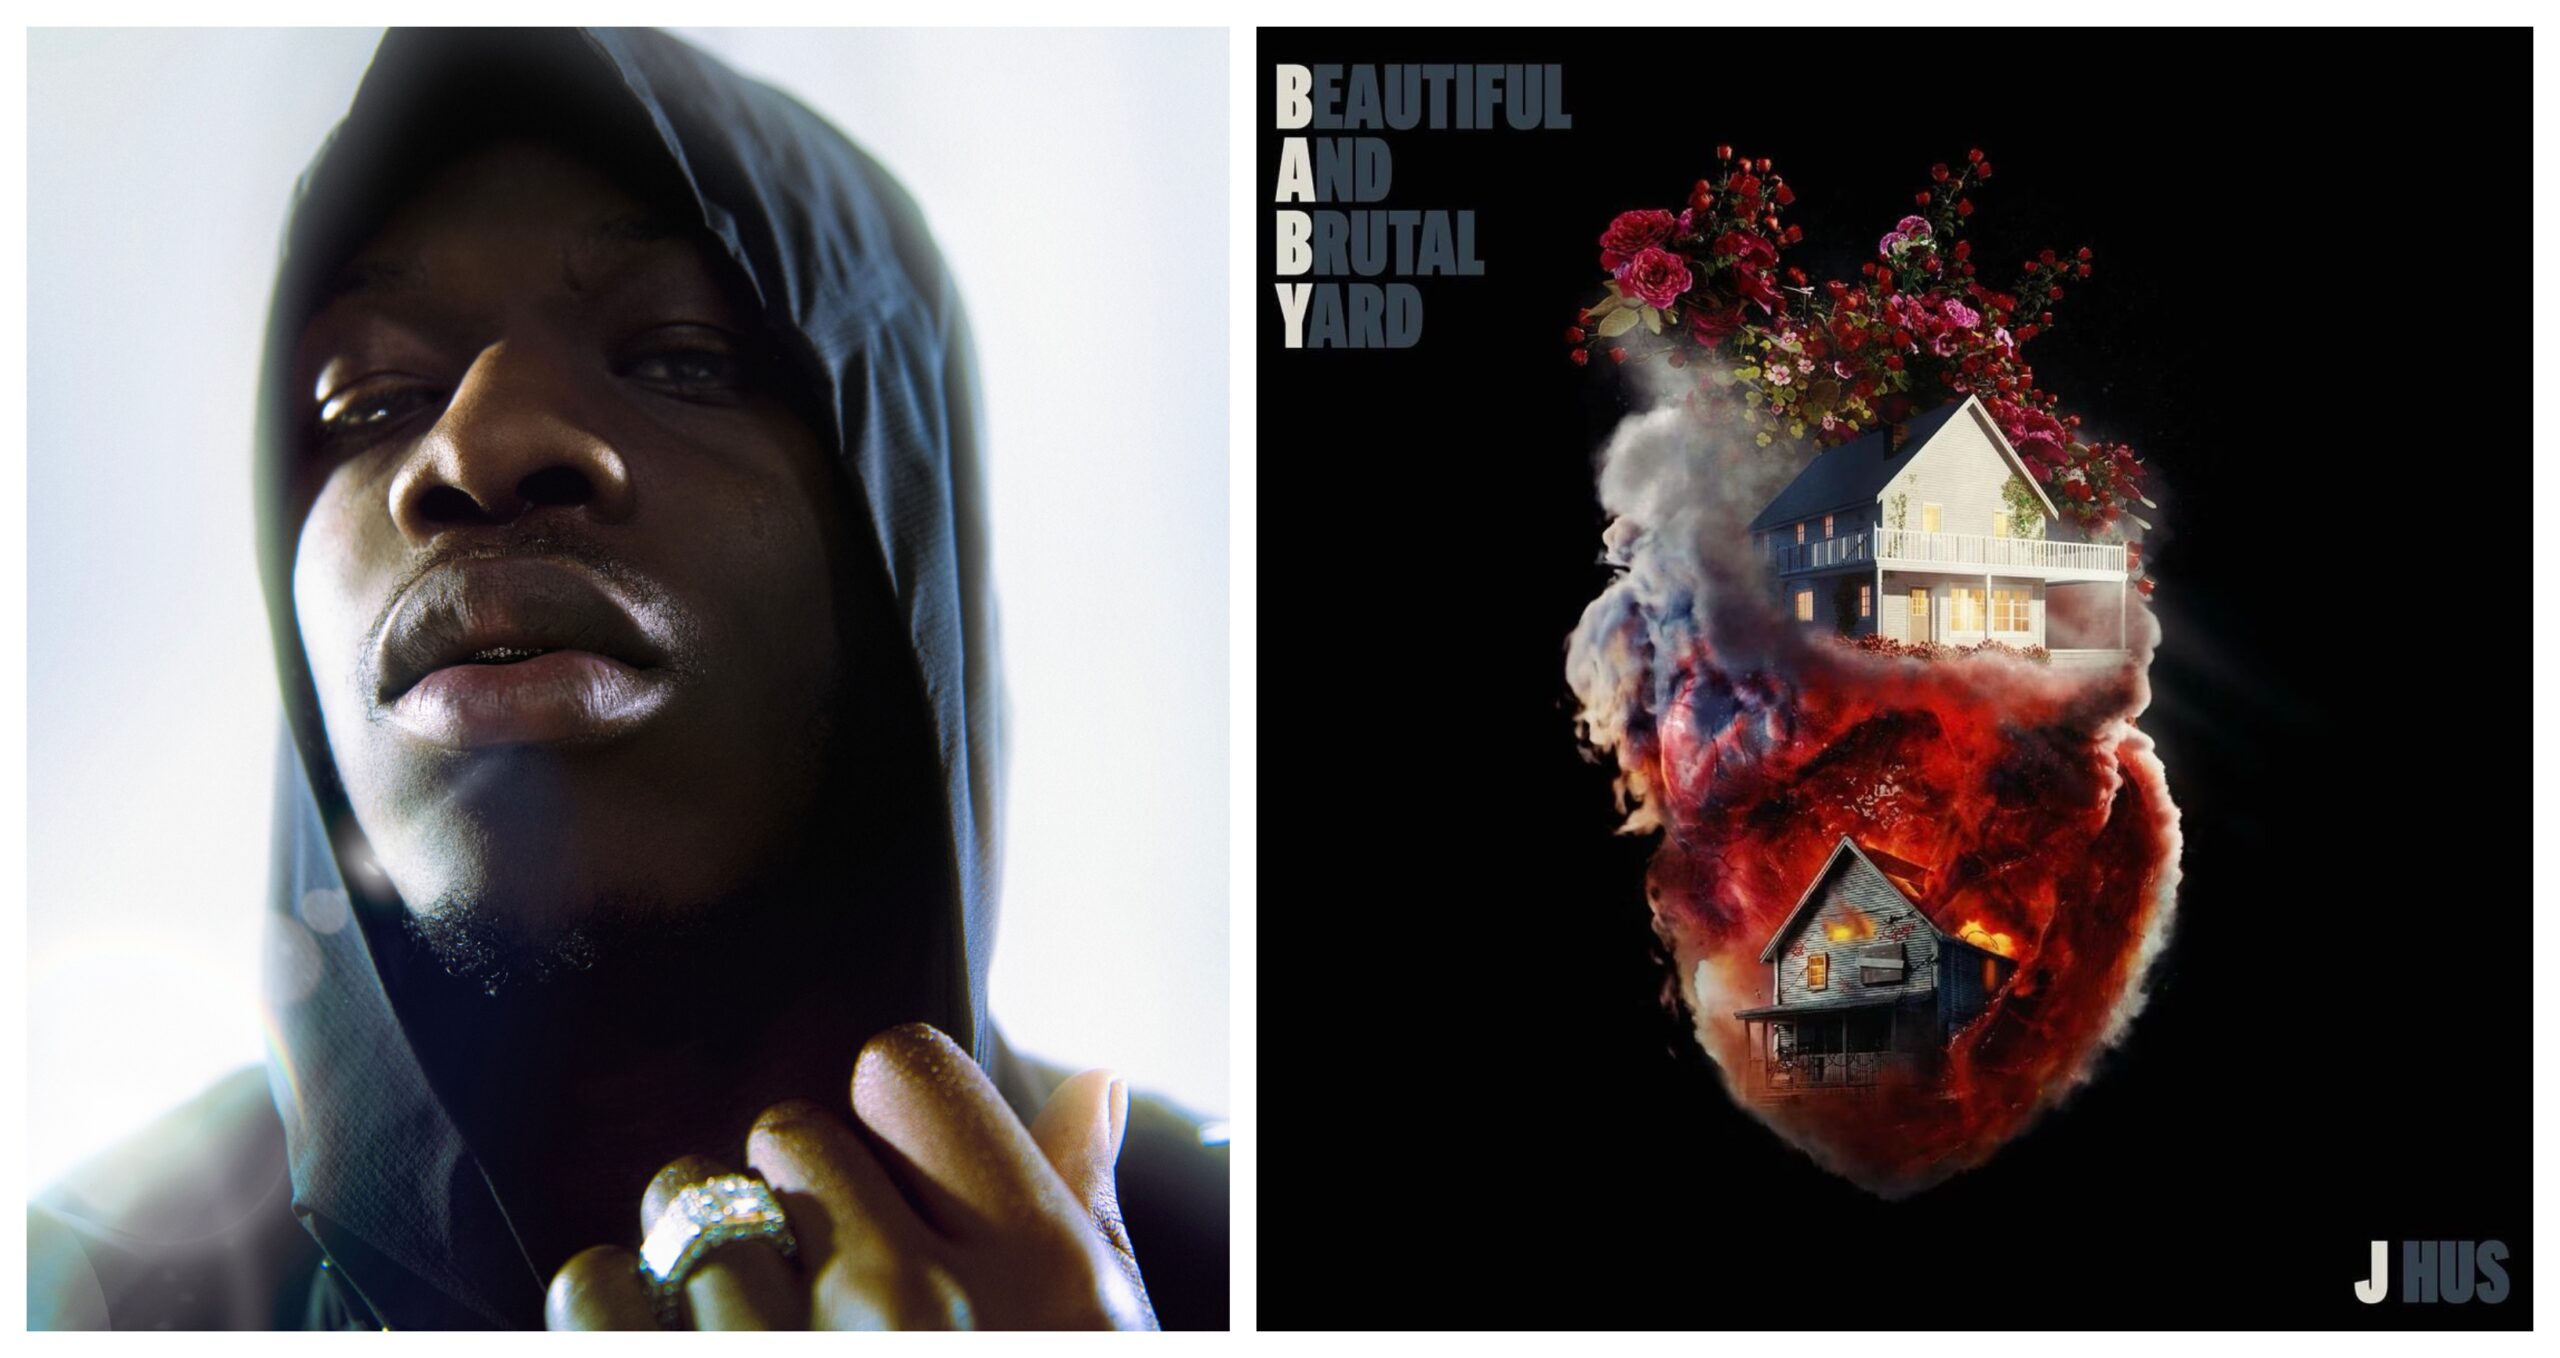 J Hus Blasts to #1 on UK Album Chart With ‘Beautiful and Brutal Yard’